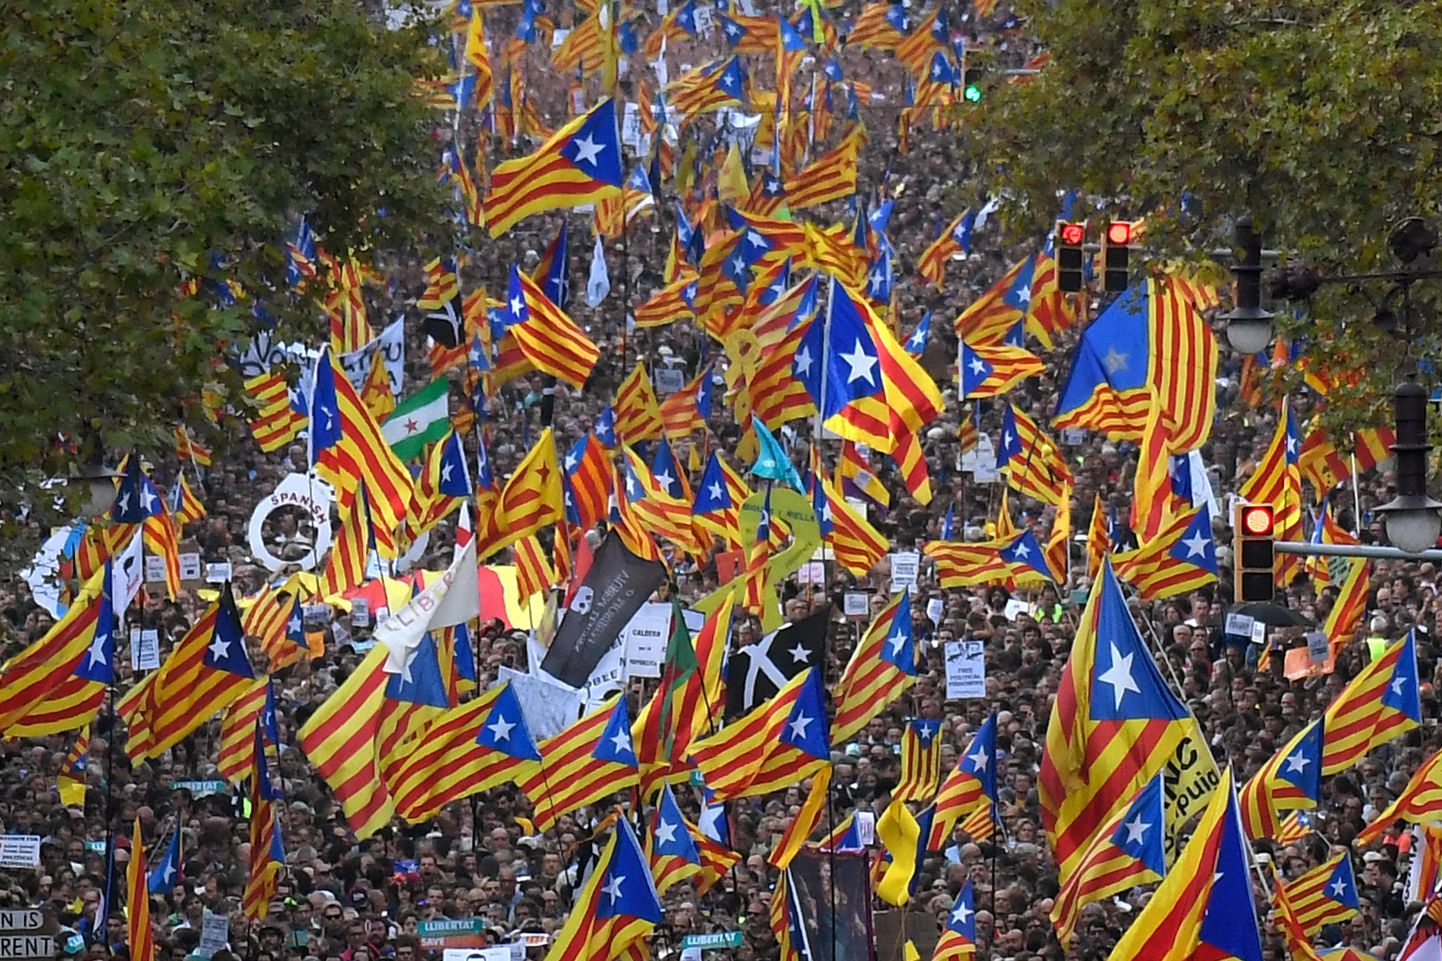 Spain announced that it will move to dismiss Catalonia's separatist government and call fresh elections in the semi-autonomous region in a bid to stop its leaders from declaring independence. / AFP PHOTO / LLUIS GENE